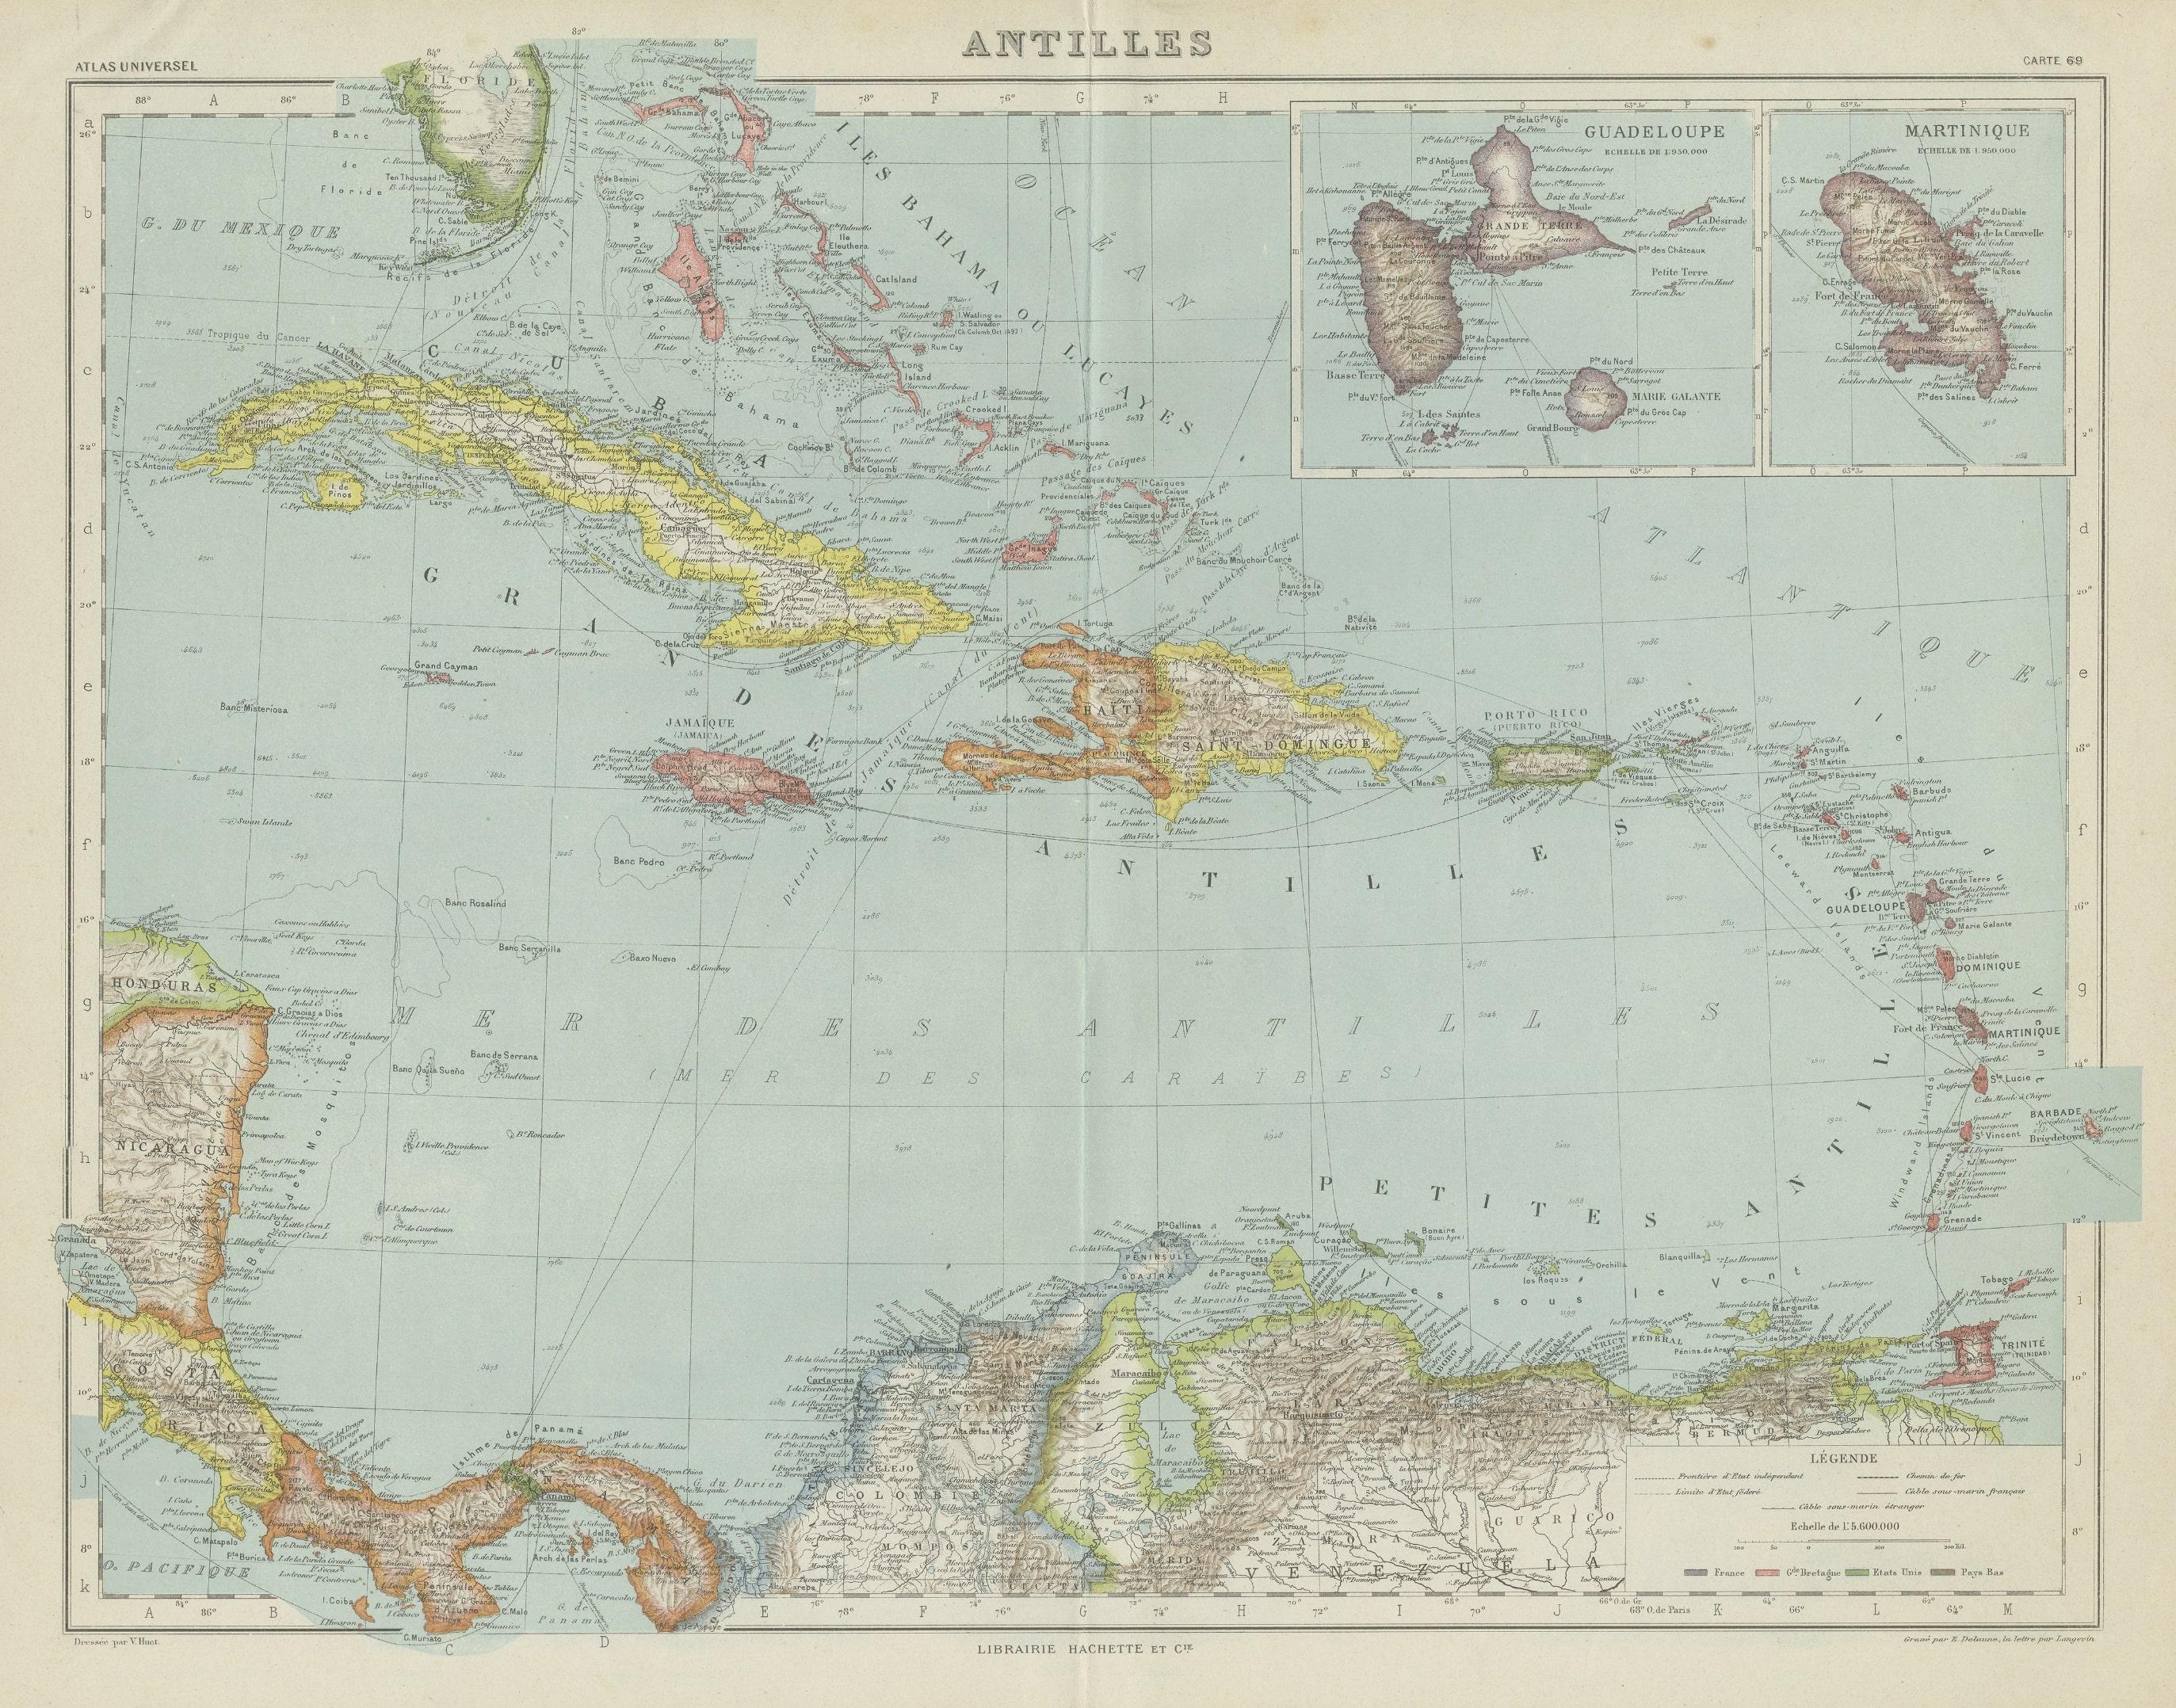 Vintage map titled 'Antilles'. Original map of the Antilles. Shows the Cayman Islands, Cuba, Hispaniola (subdivided into the nations of the Dominican Republic and Haiti), Jamaica, and Puerto Rico. Also shows the Lesser Antilles, a group of islands